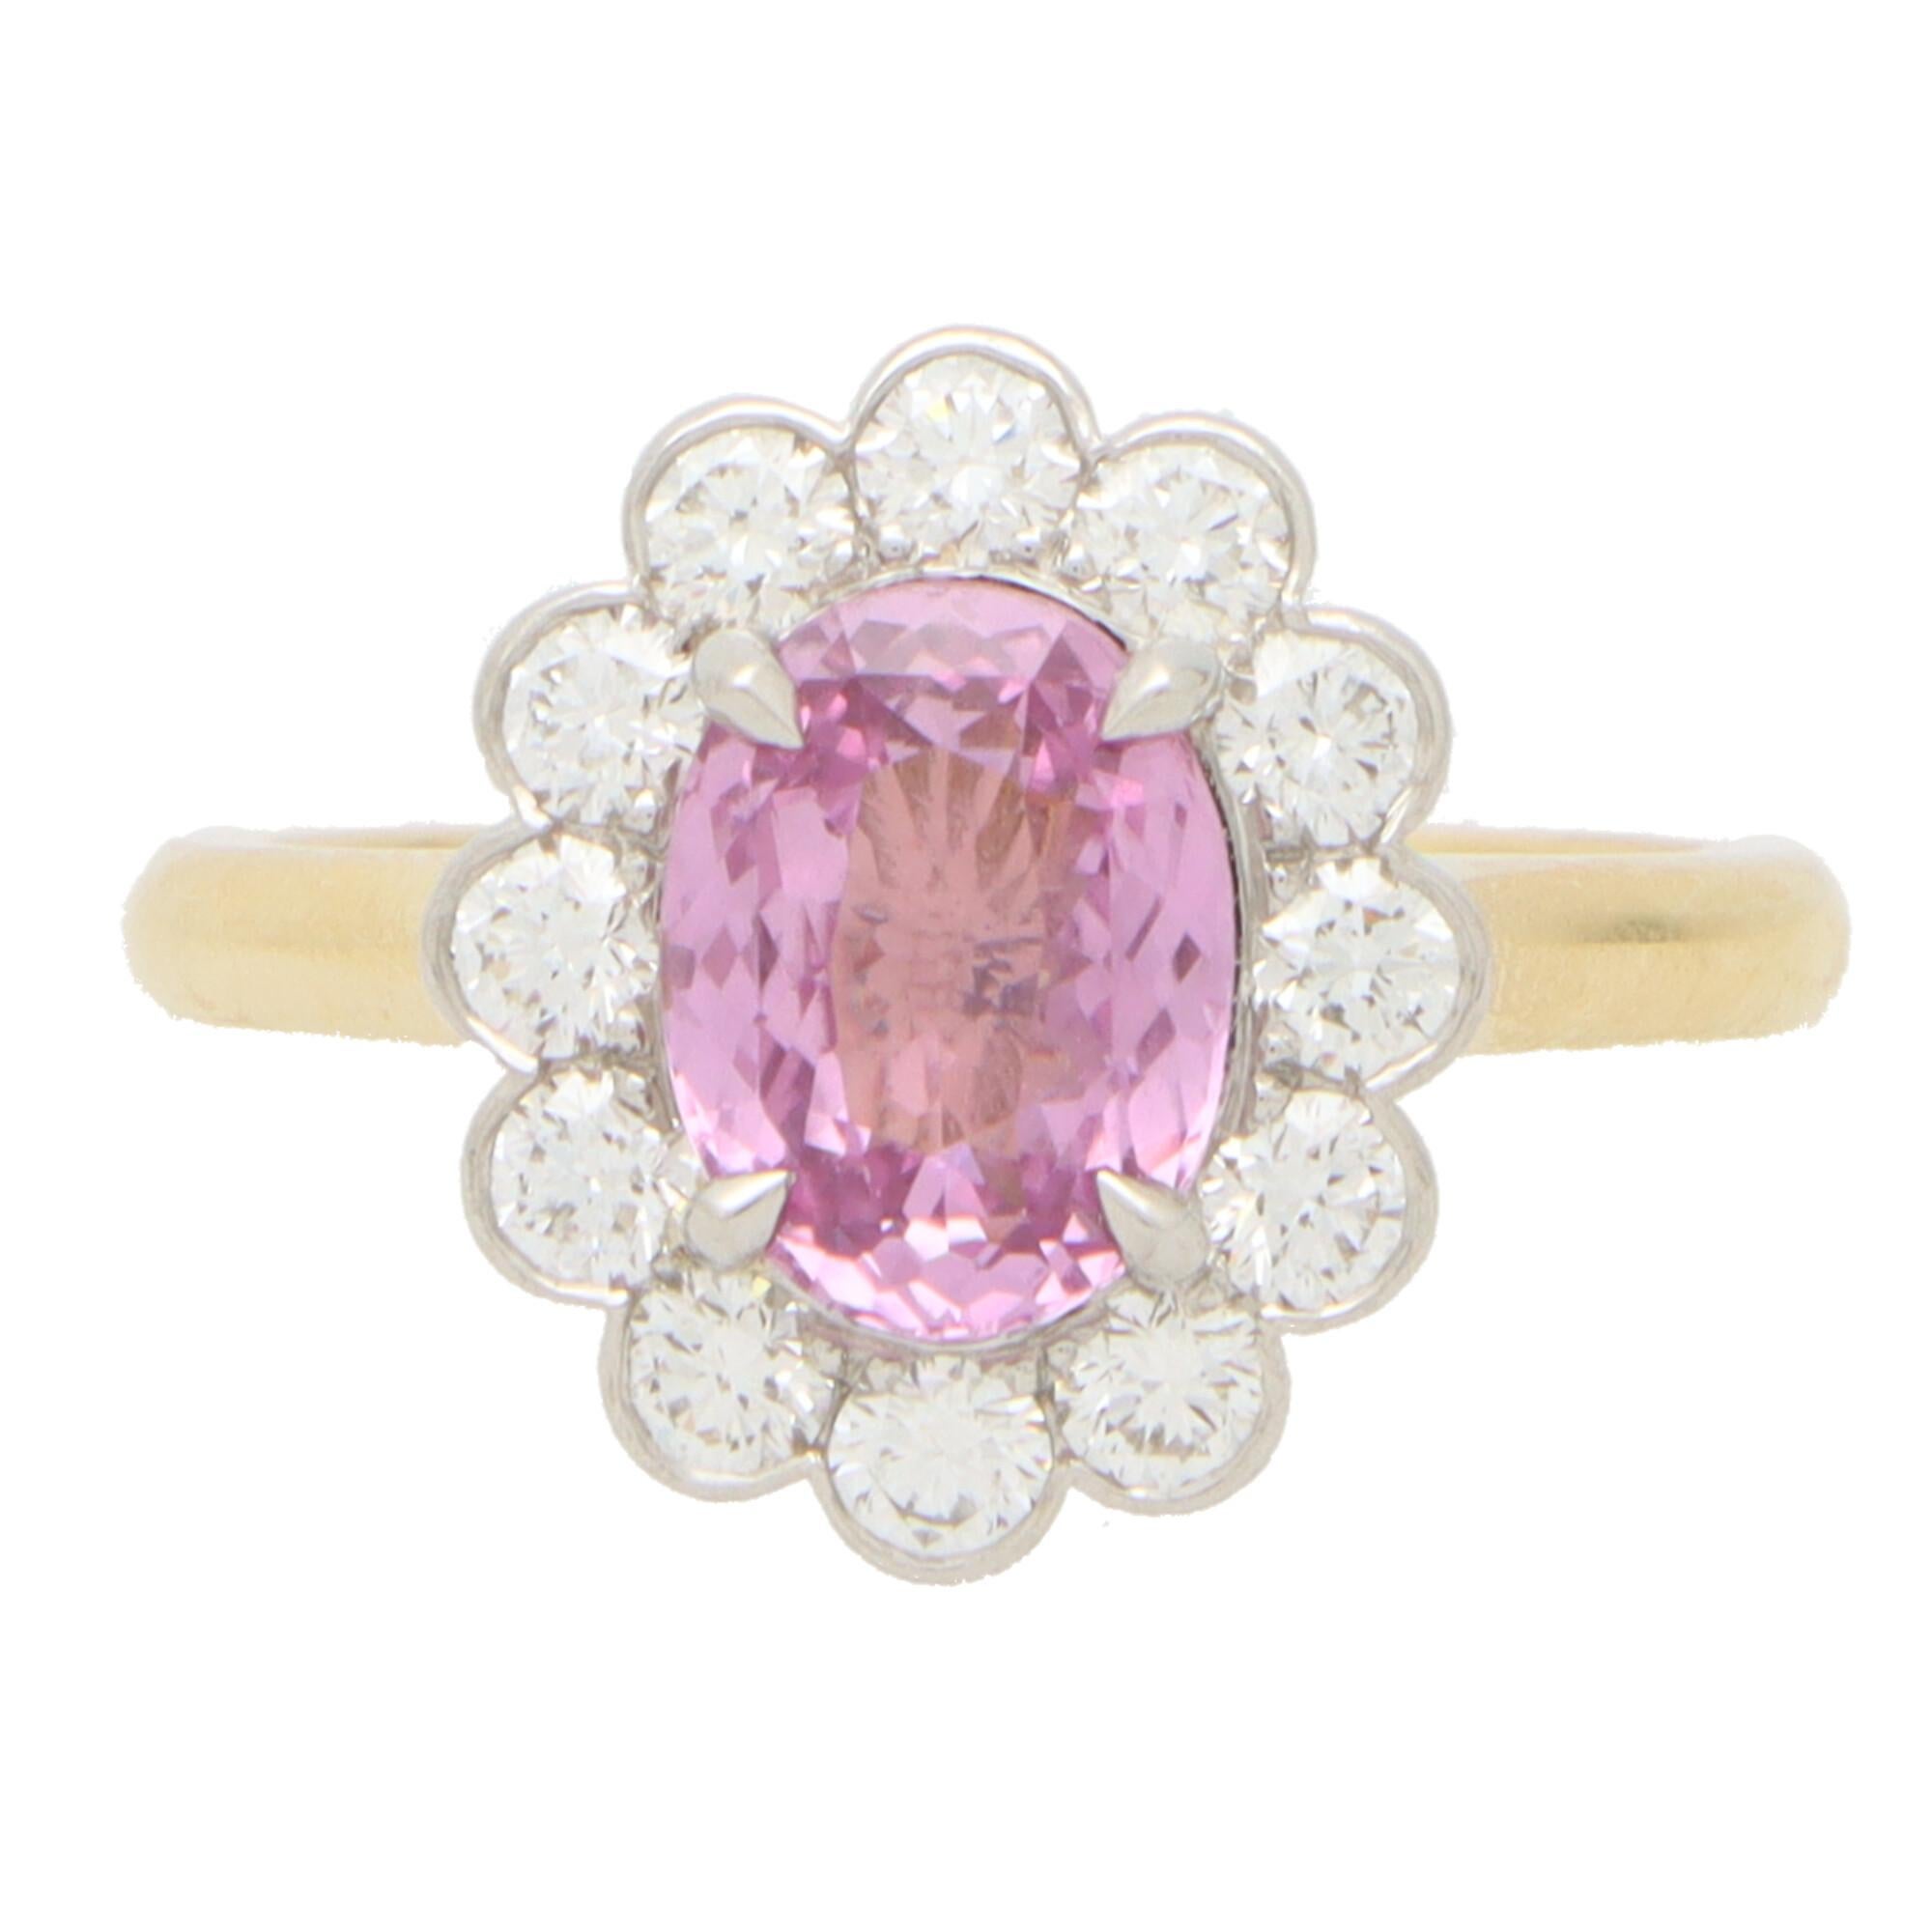 Women's or Men's Contemporary Pink Sapphire and Diamond Floral Cluster Ring in 18k Gold